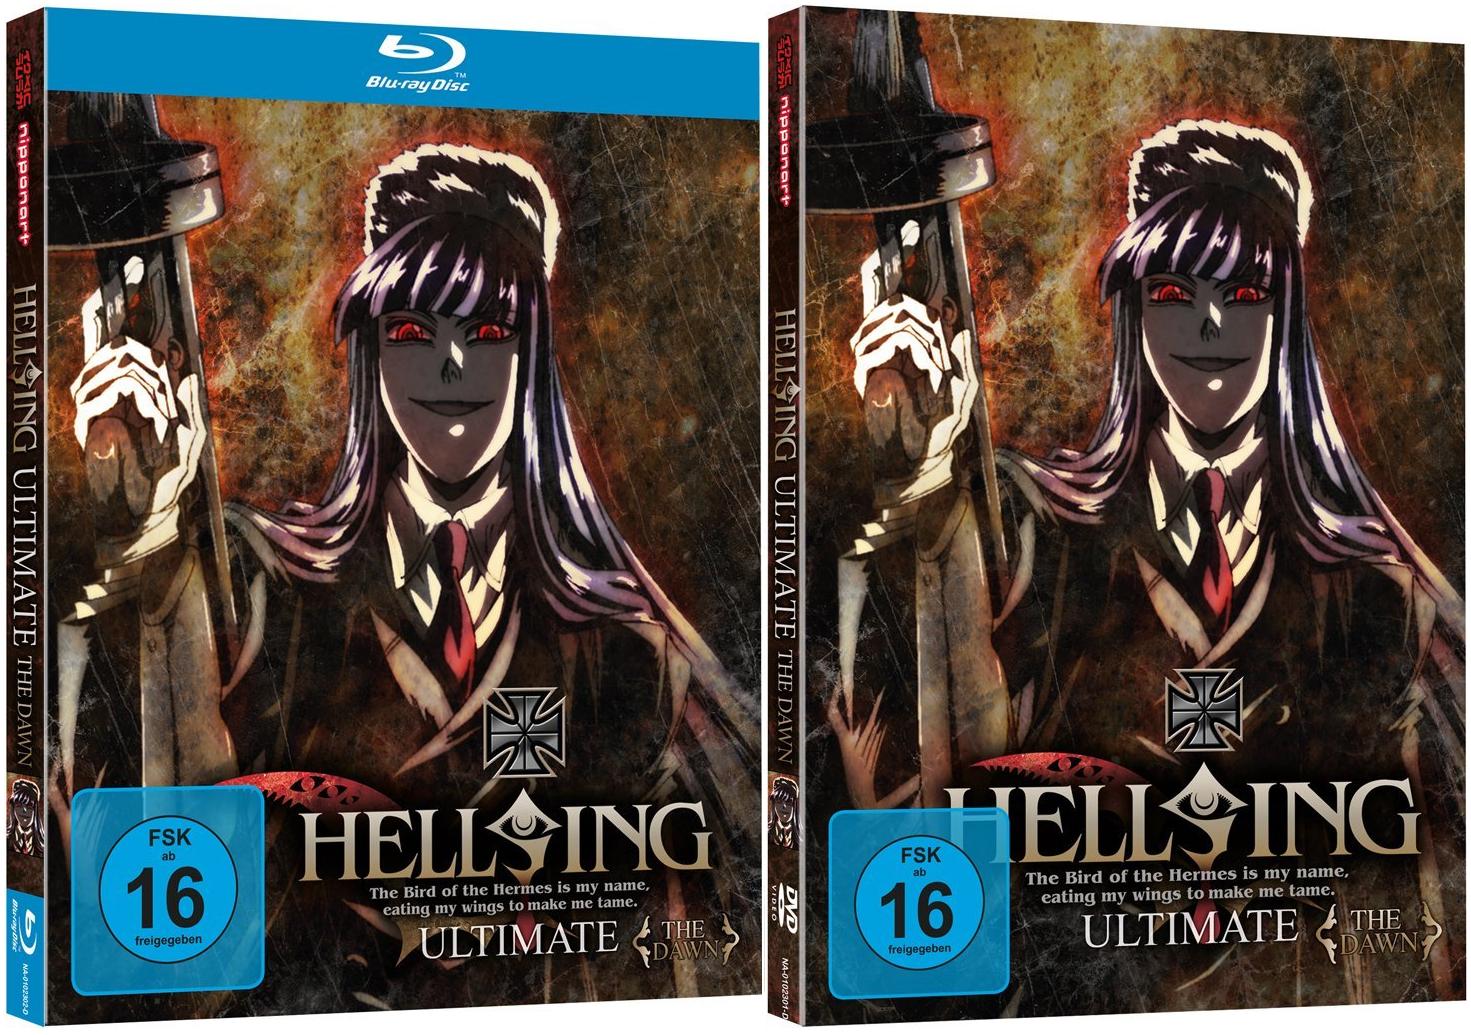 WTK on X: Hellsing Ultimate: The Dawn (Blu-ray or DVD) coming soon from  Germany:  / X